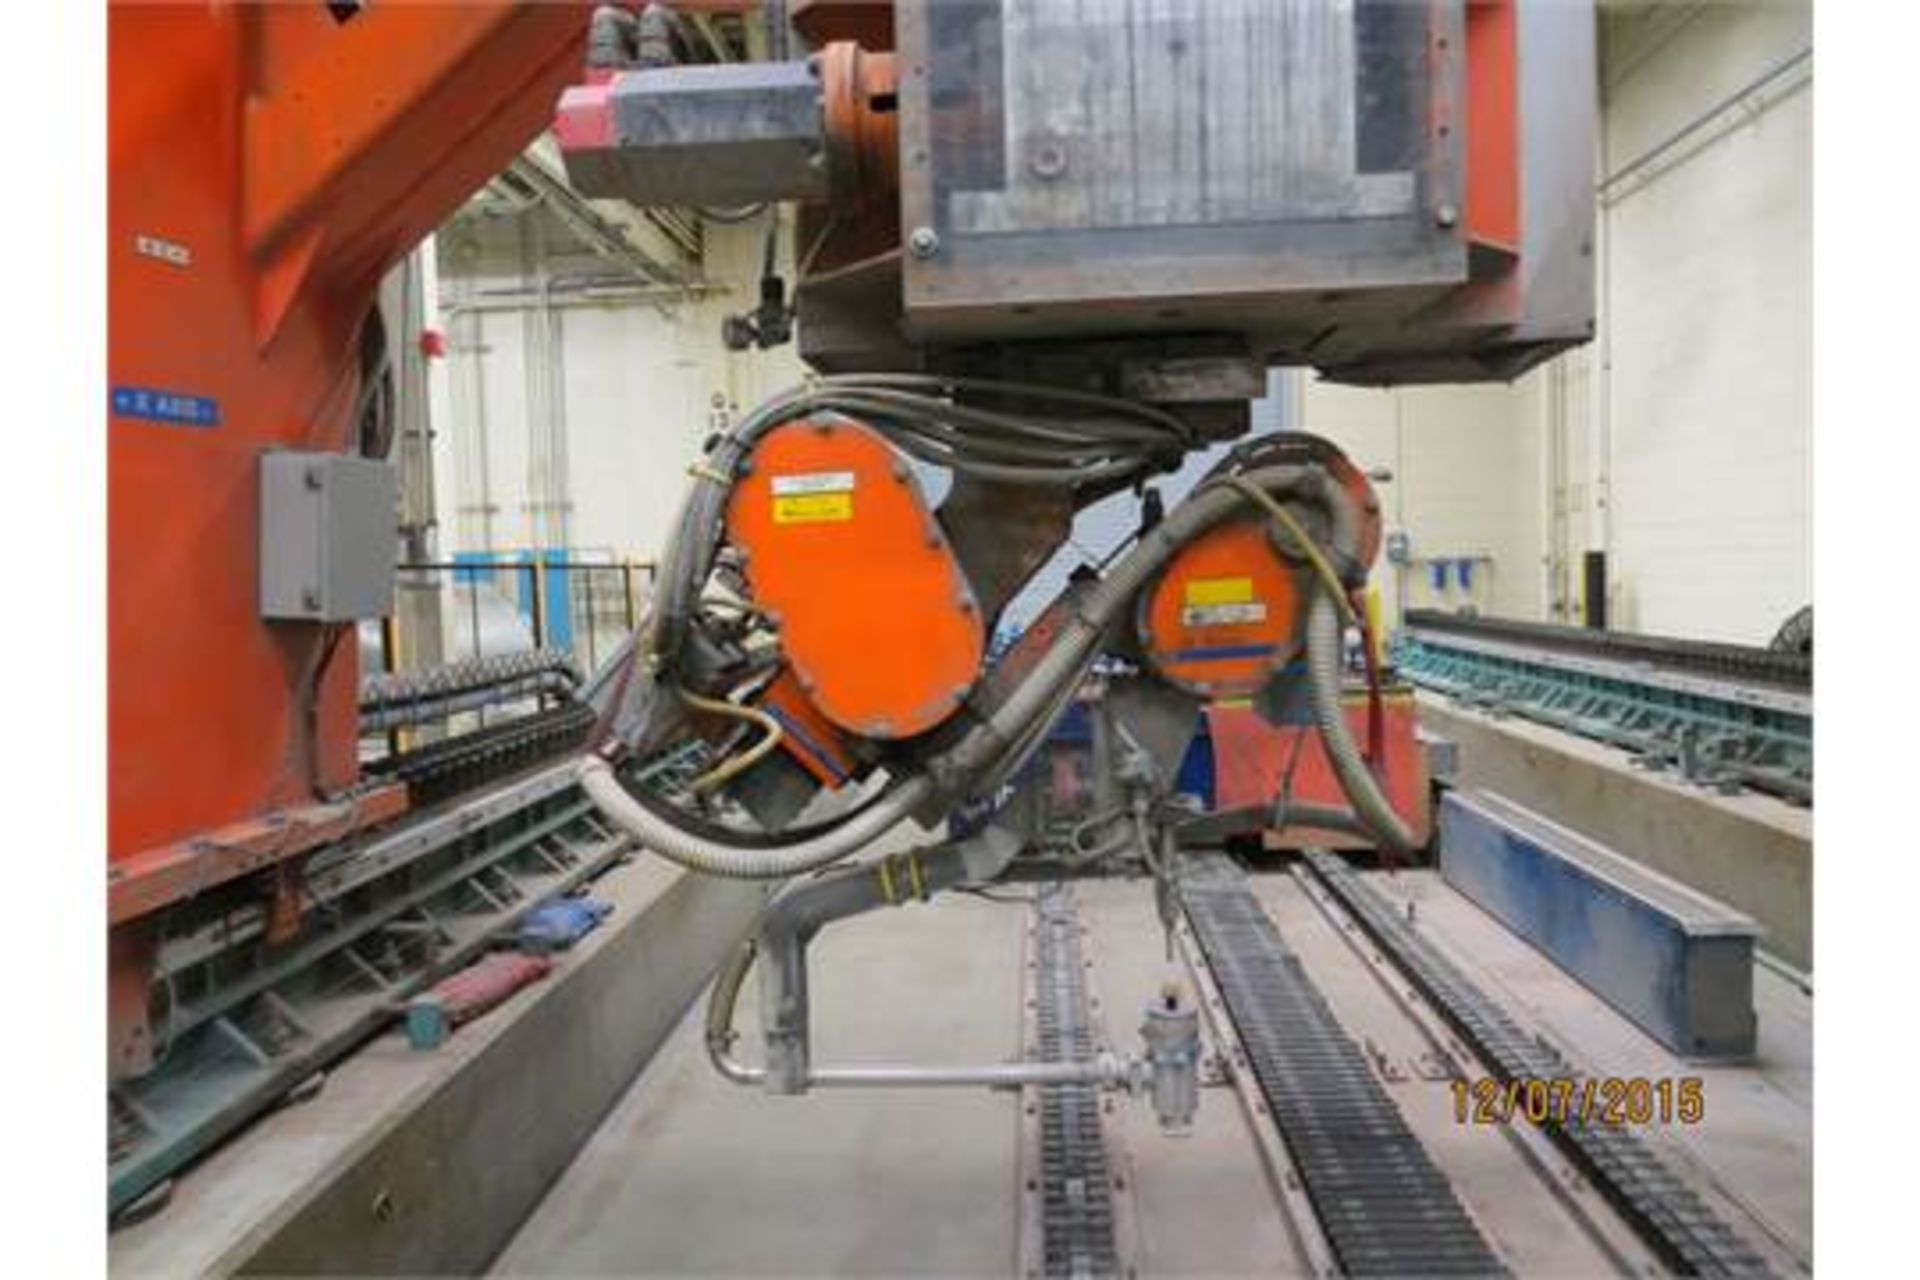 ASI Robotic System CNC 11 Axis Gantry Water Jet - Image 7 of 11